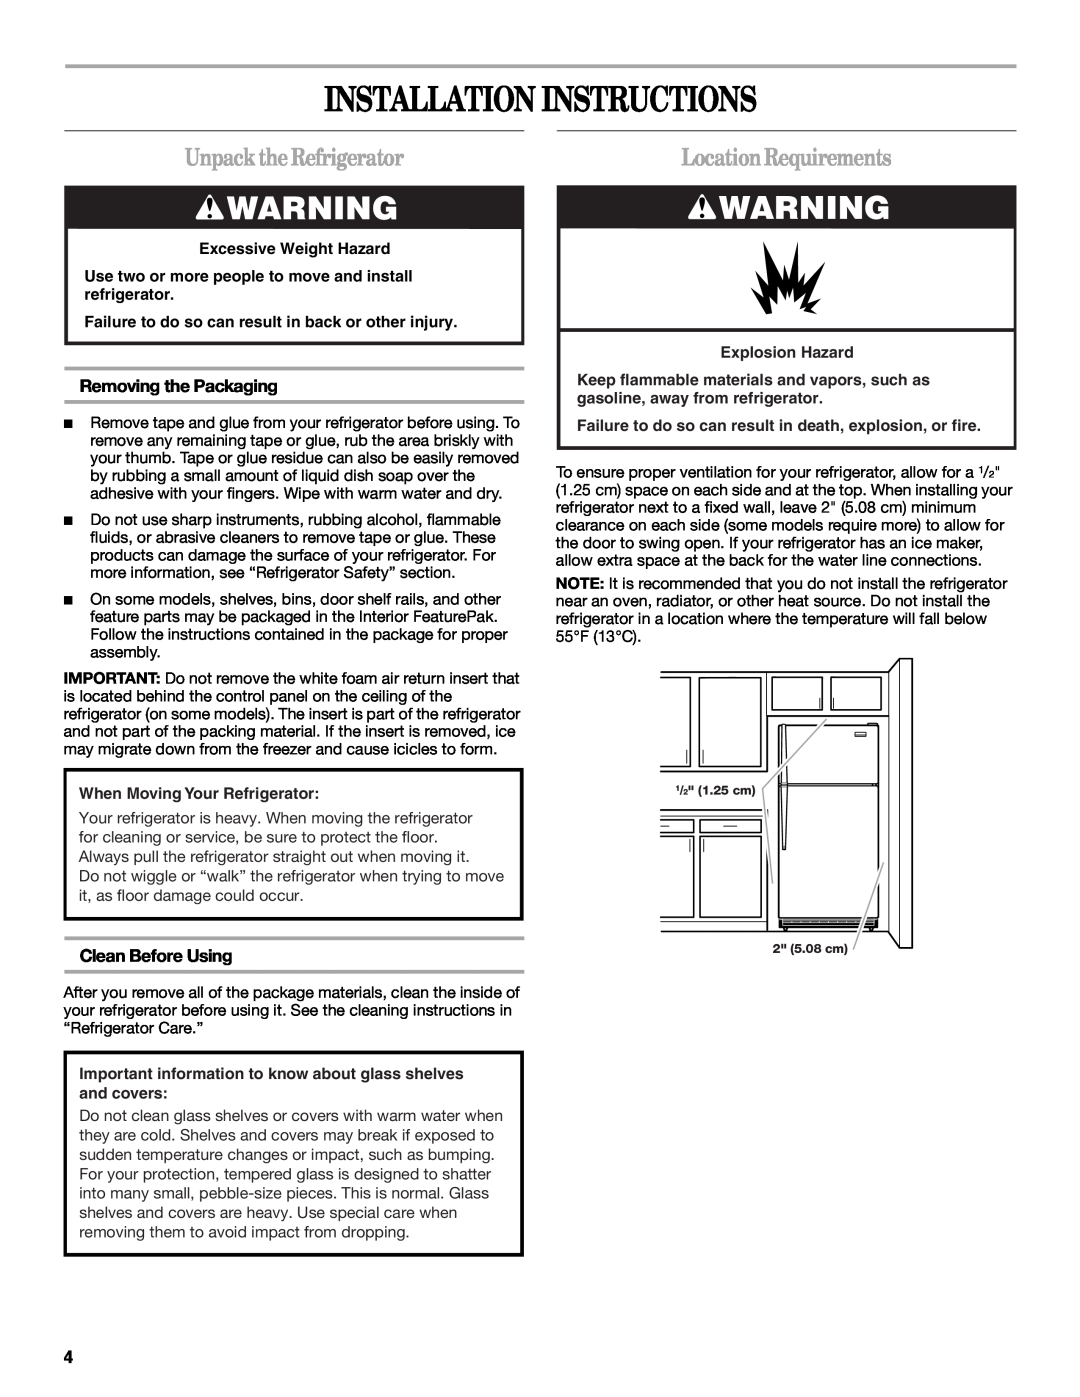 Whirlpool 338, 2314183 manual Installation Instructions, UnpacktheRefrigerator, LocationRequirements, Removing the Packaging 